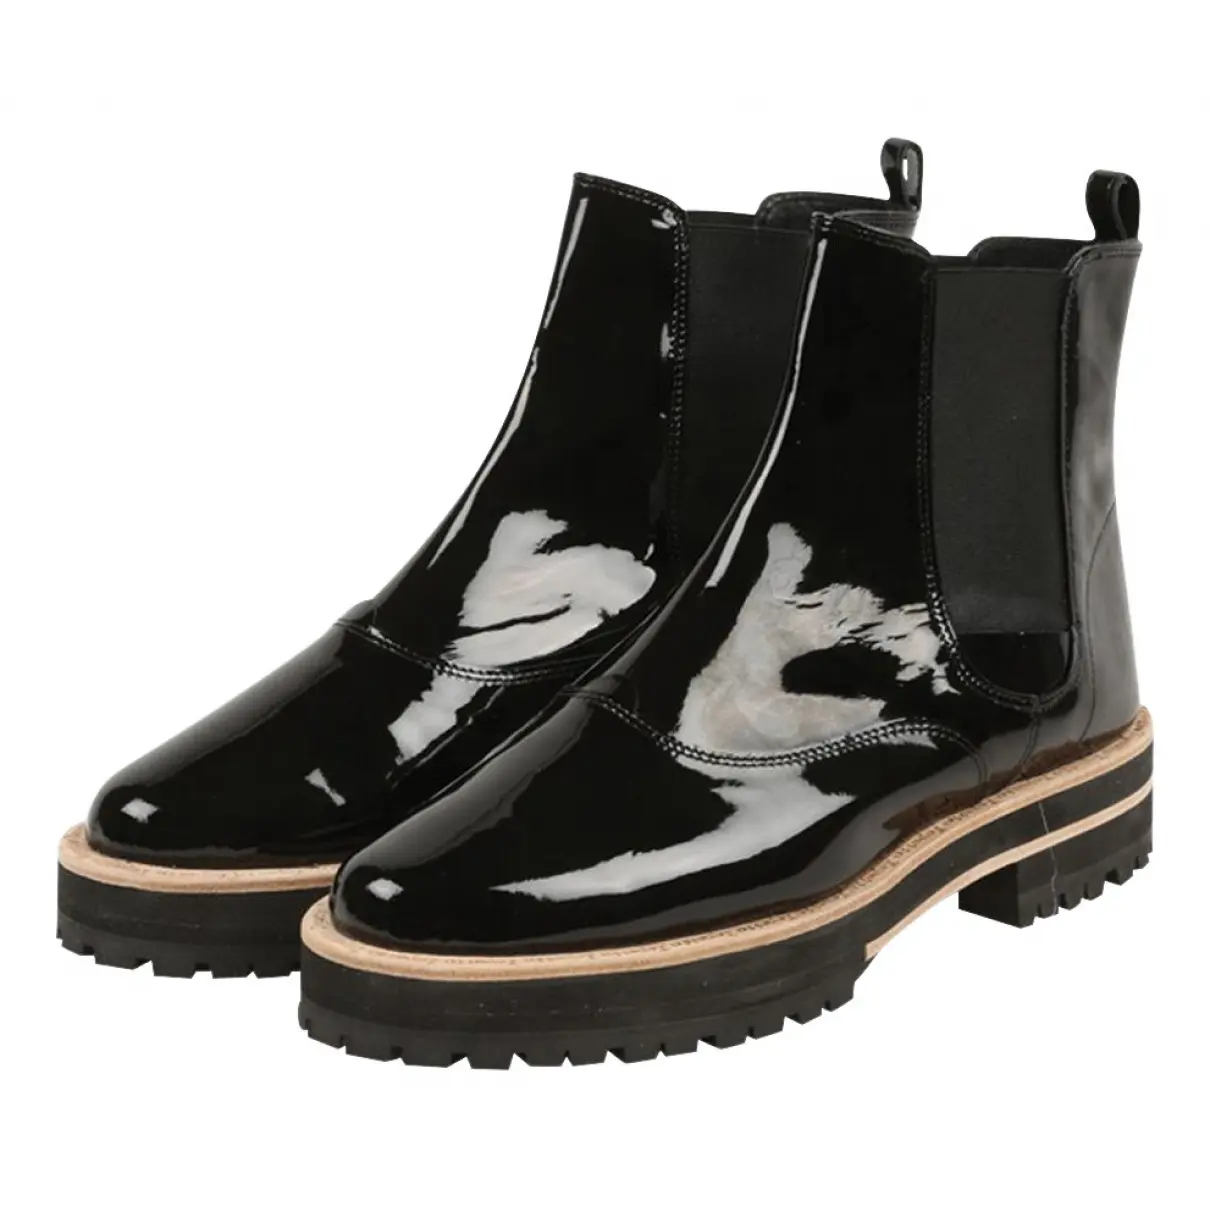 Patent leather ankle boots Repetto